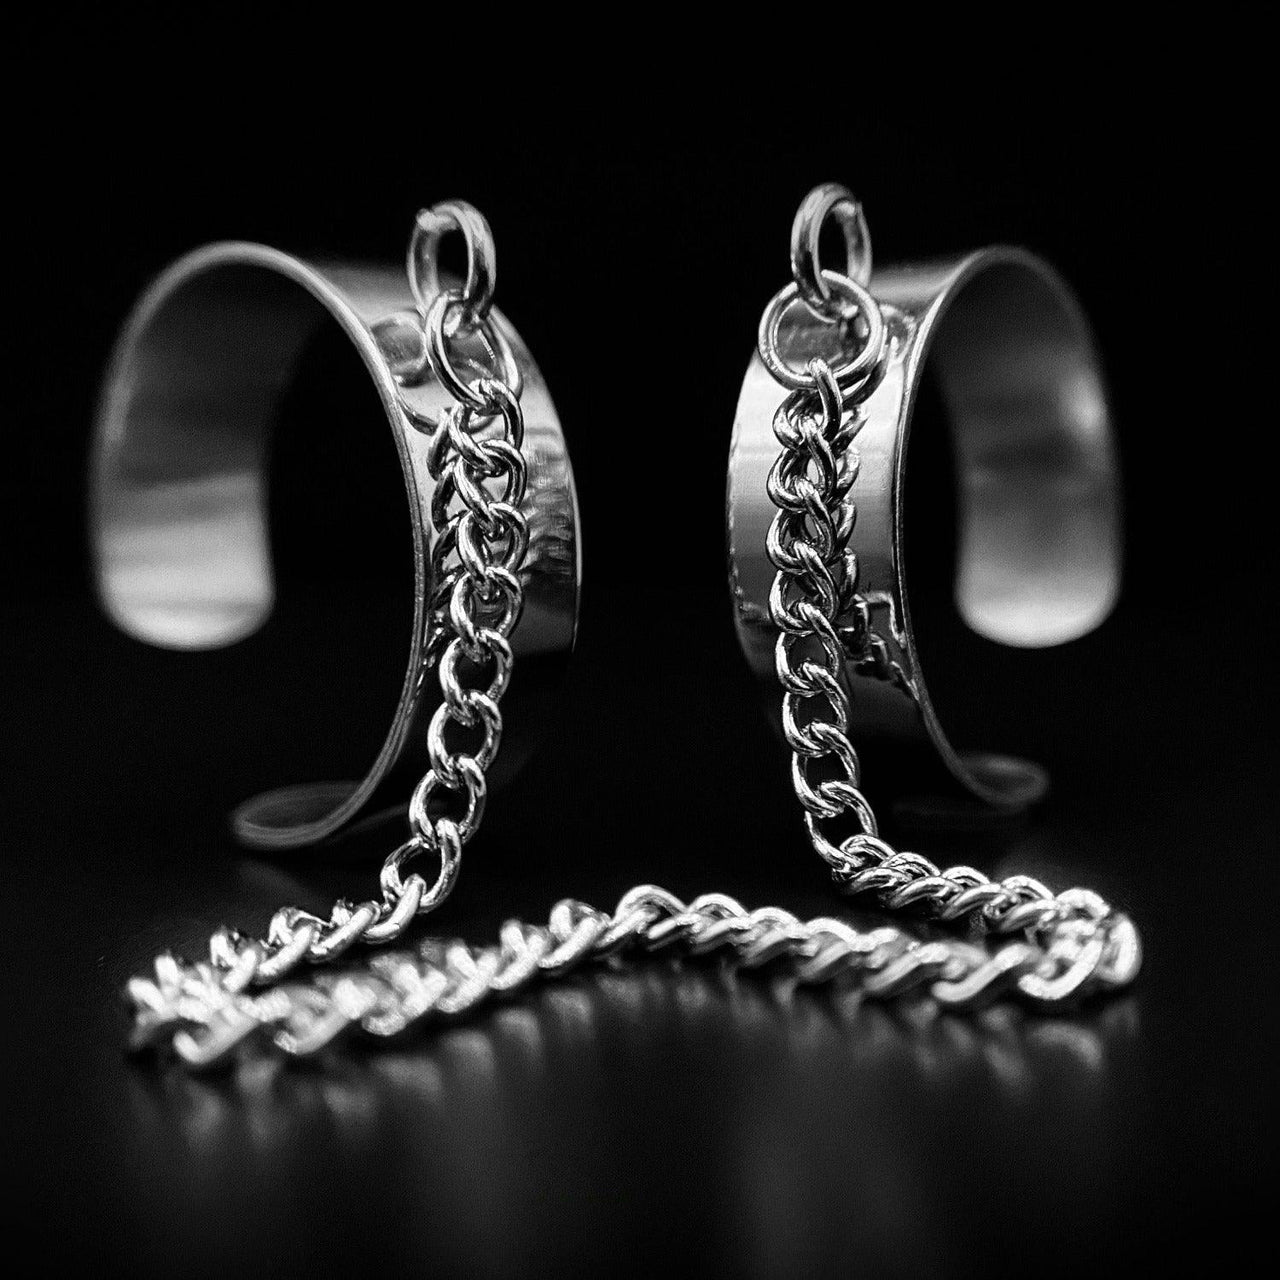 Chain Link Ring Set - Black Feather Design